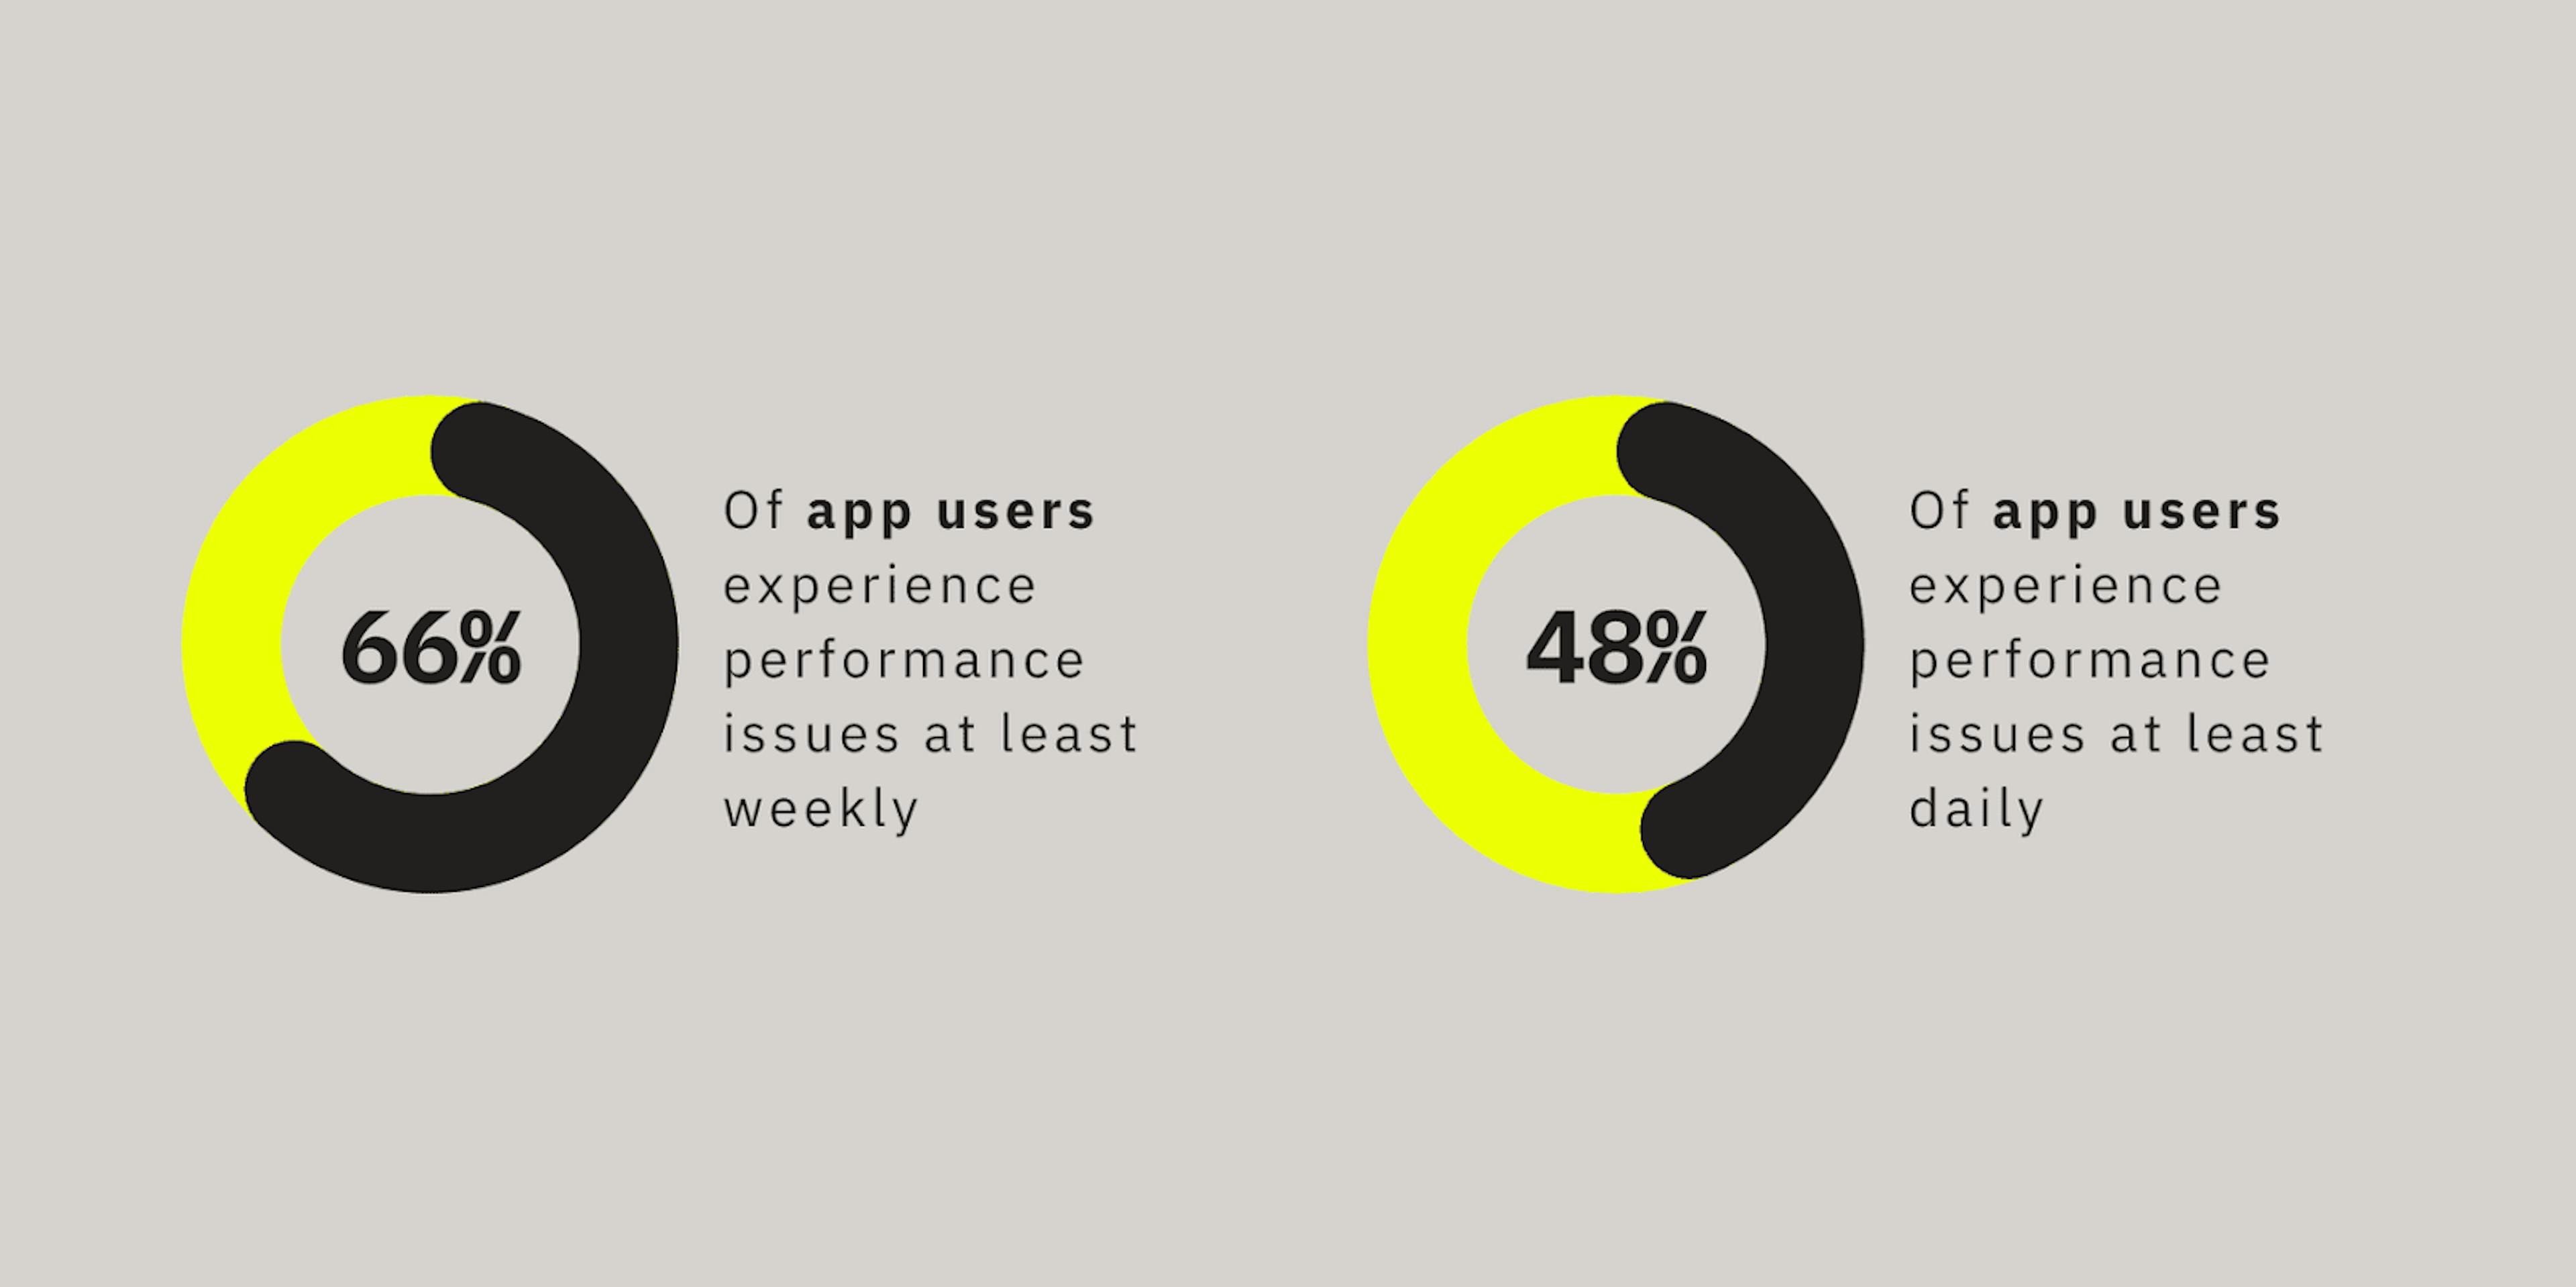 % of U.S. app users who report that they experience performance issues weekly, daily